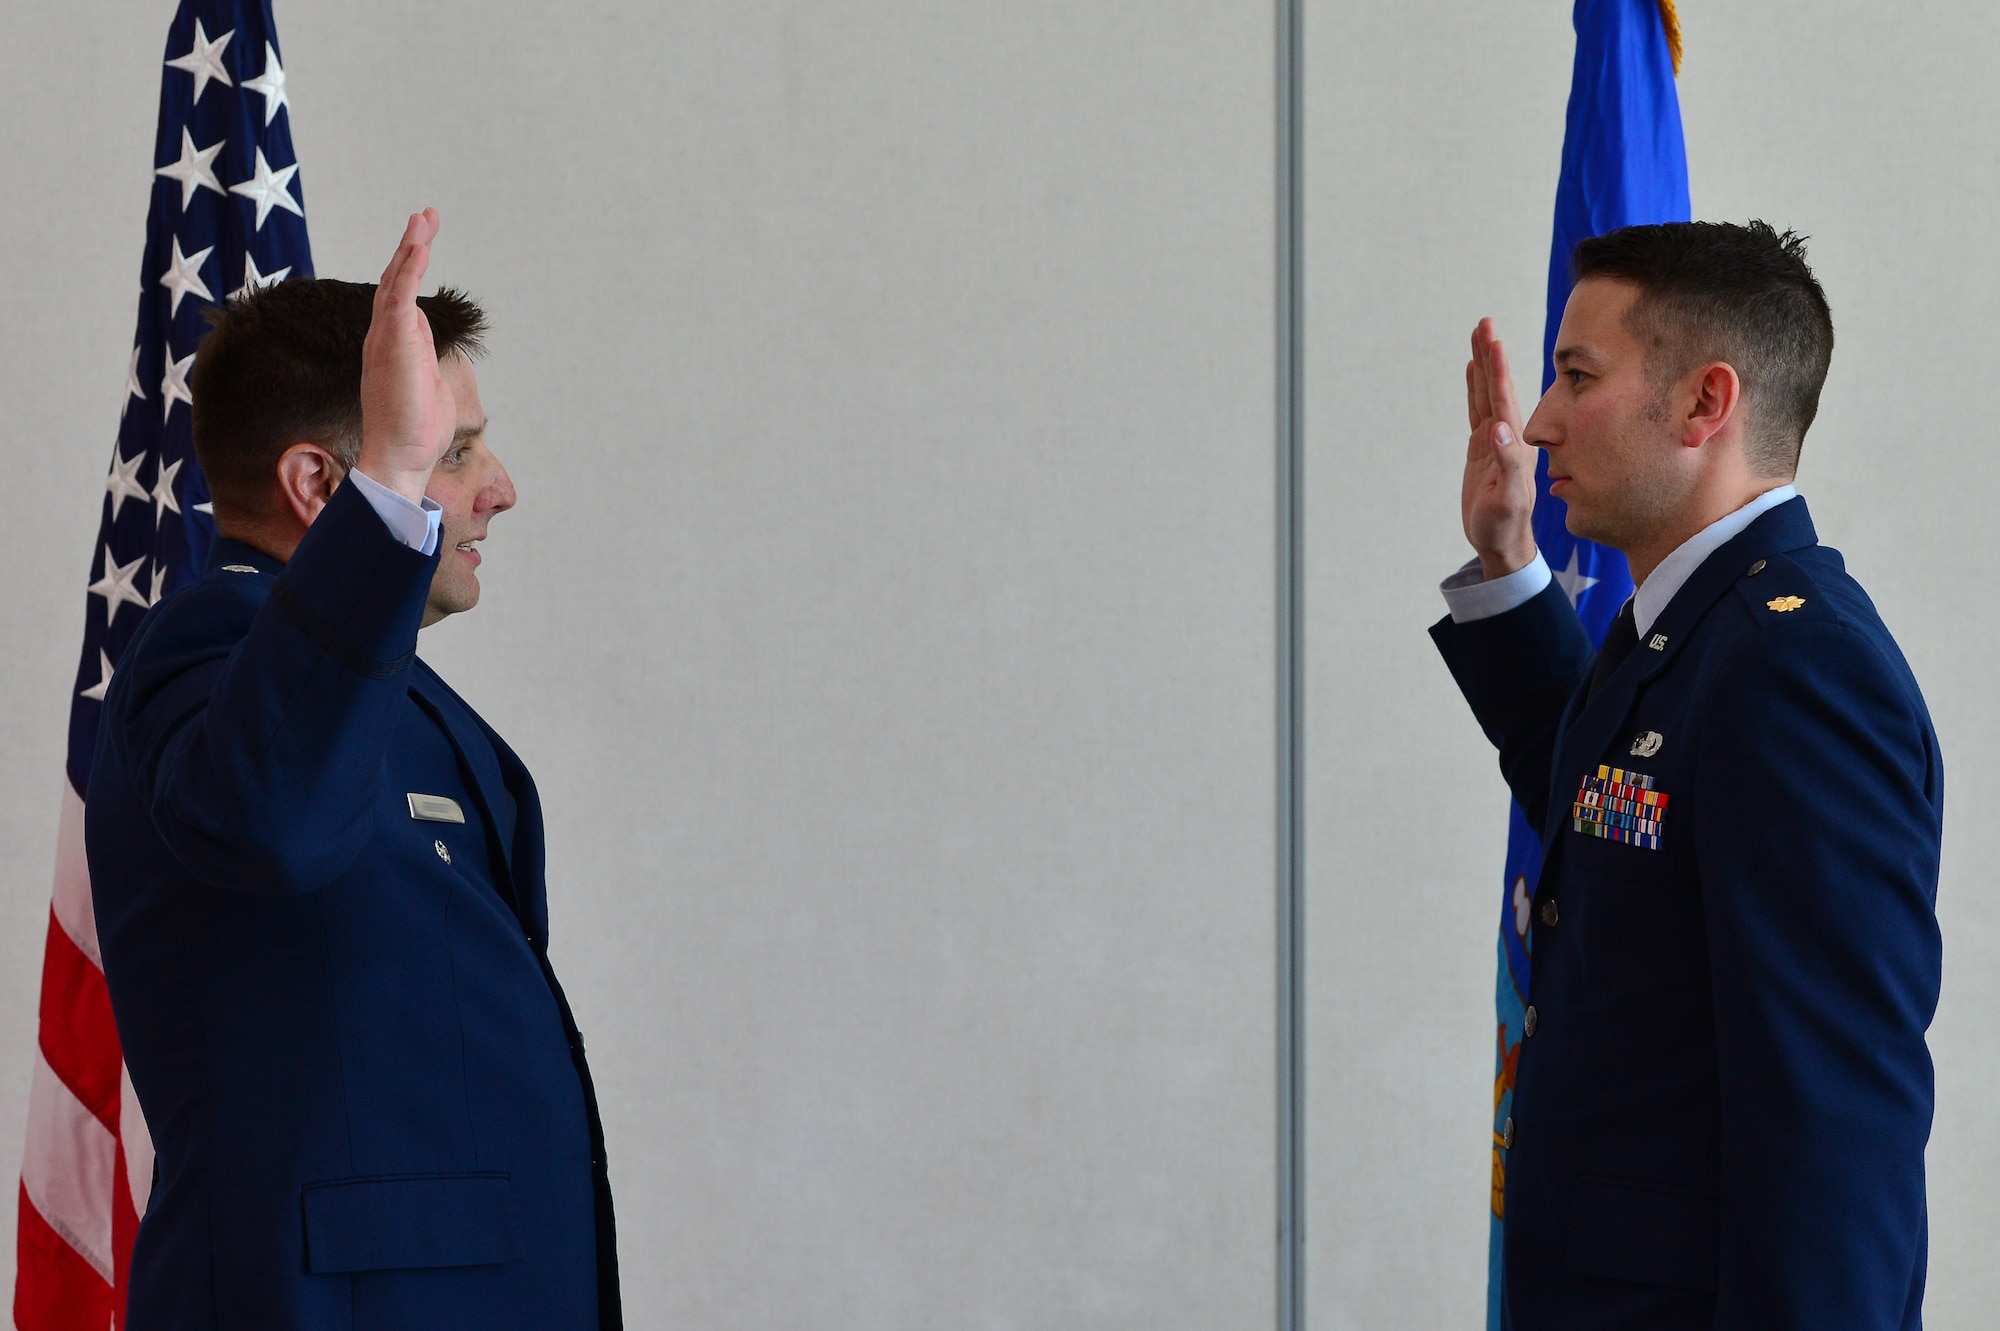 Maj. Phillip, 732nd Operations Group chief of intelligence, recites his oath of office during his promotion ceremony March 31, 2018, in Las Vegas. Though he is a third generation Airman, Phillip is the first generation officer in his family. (U.S. Air Force photo by Airman 1st Class Haley Stevens)